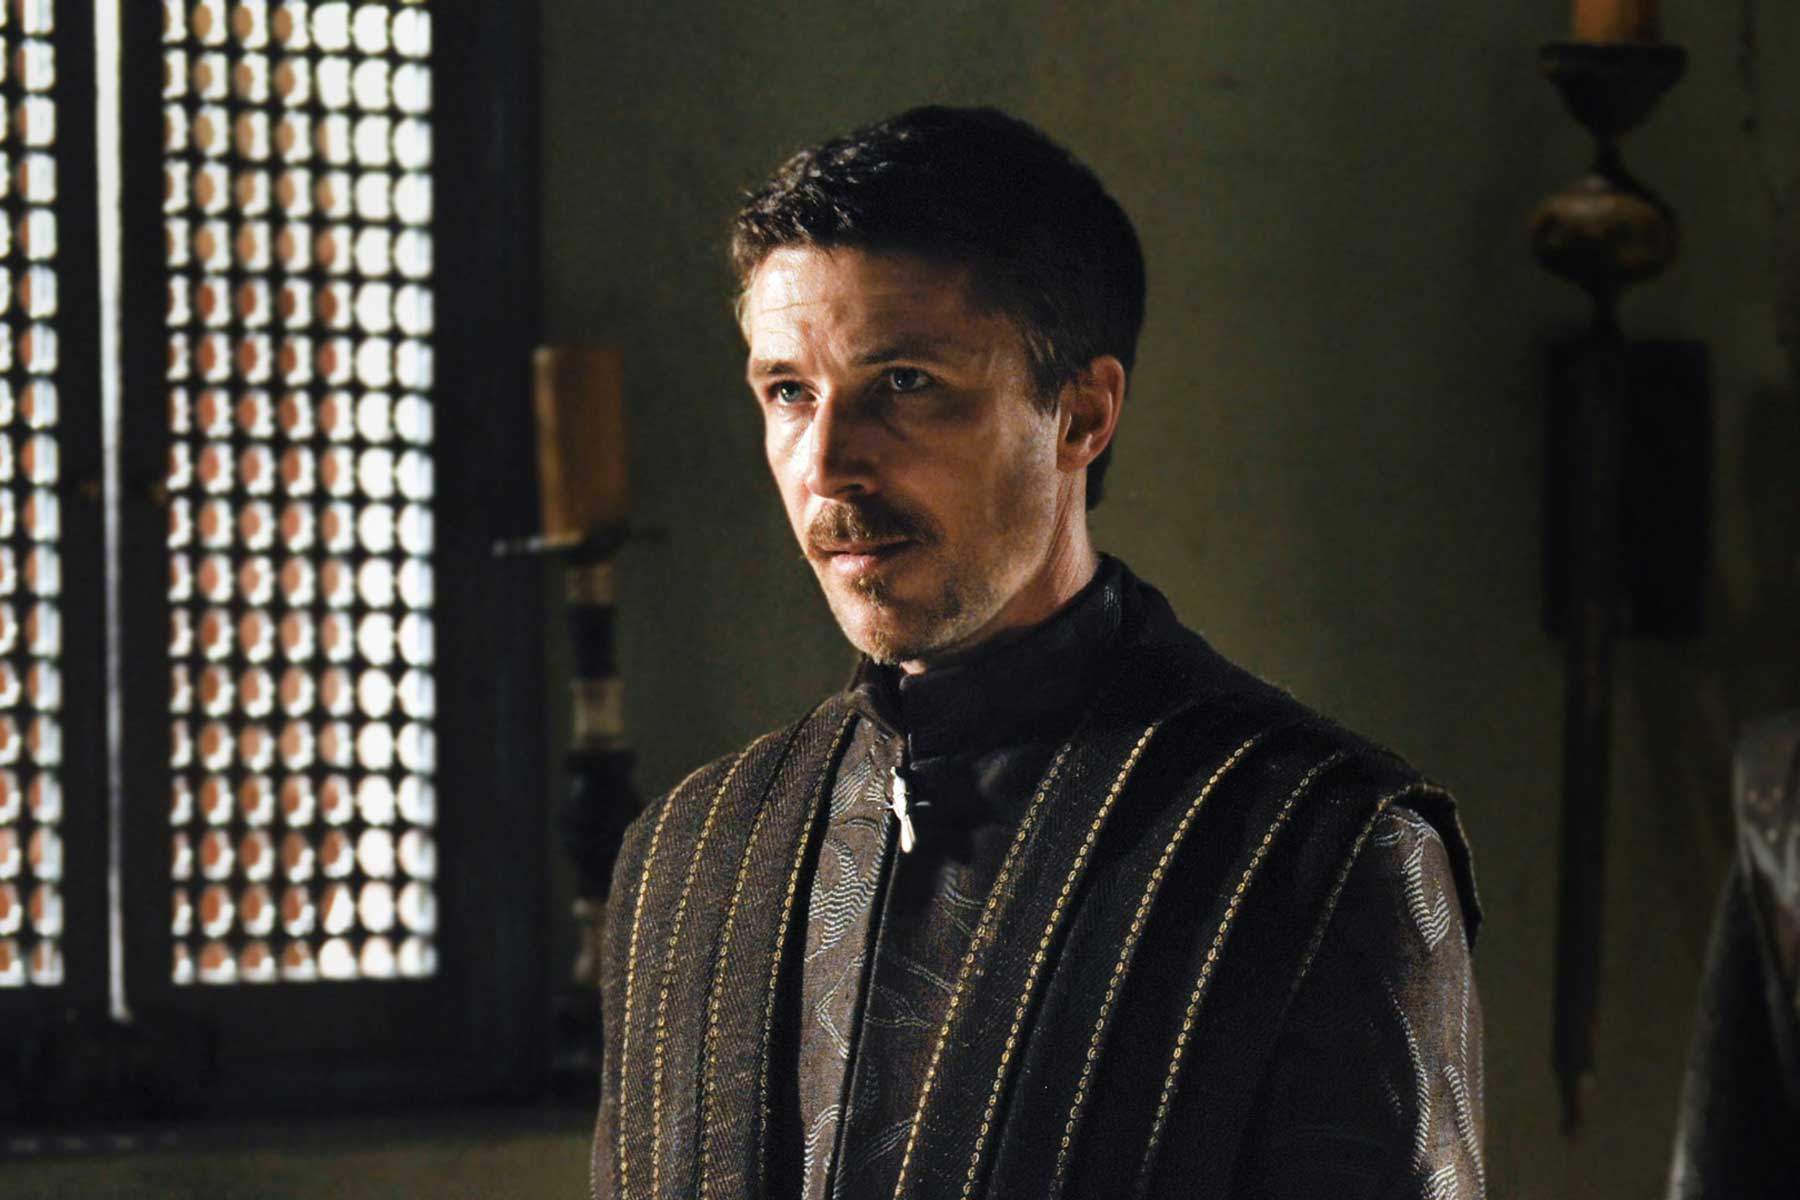 ⚔️ Only “Game of Thrones” Experts Can Pass This Season 7 Quiz. Can You? Petyr Baelish